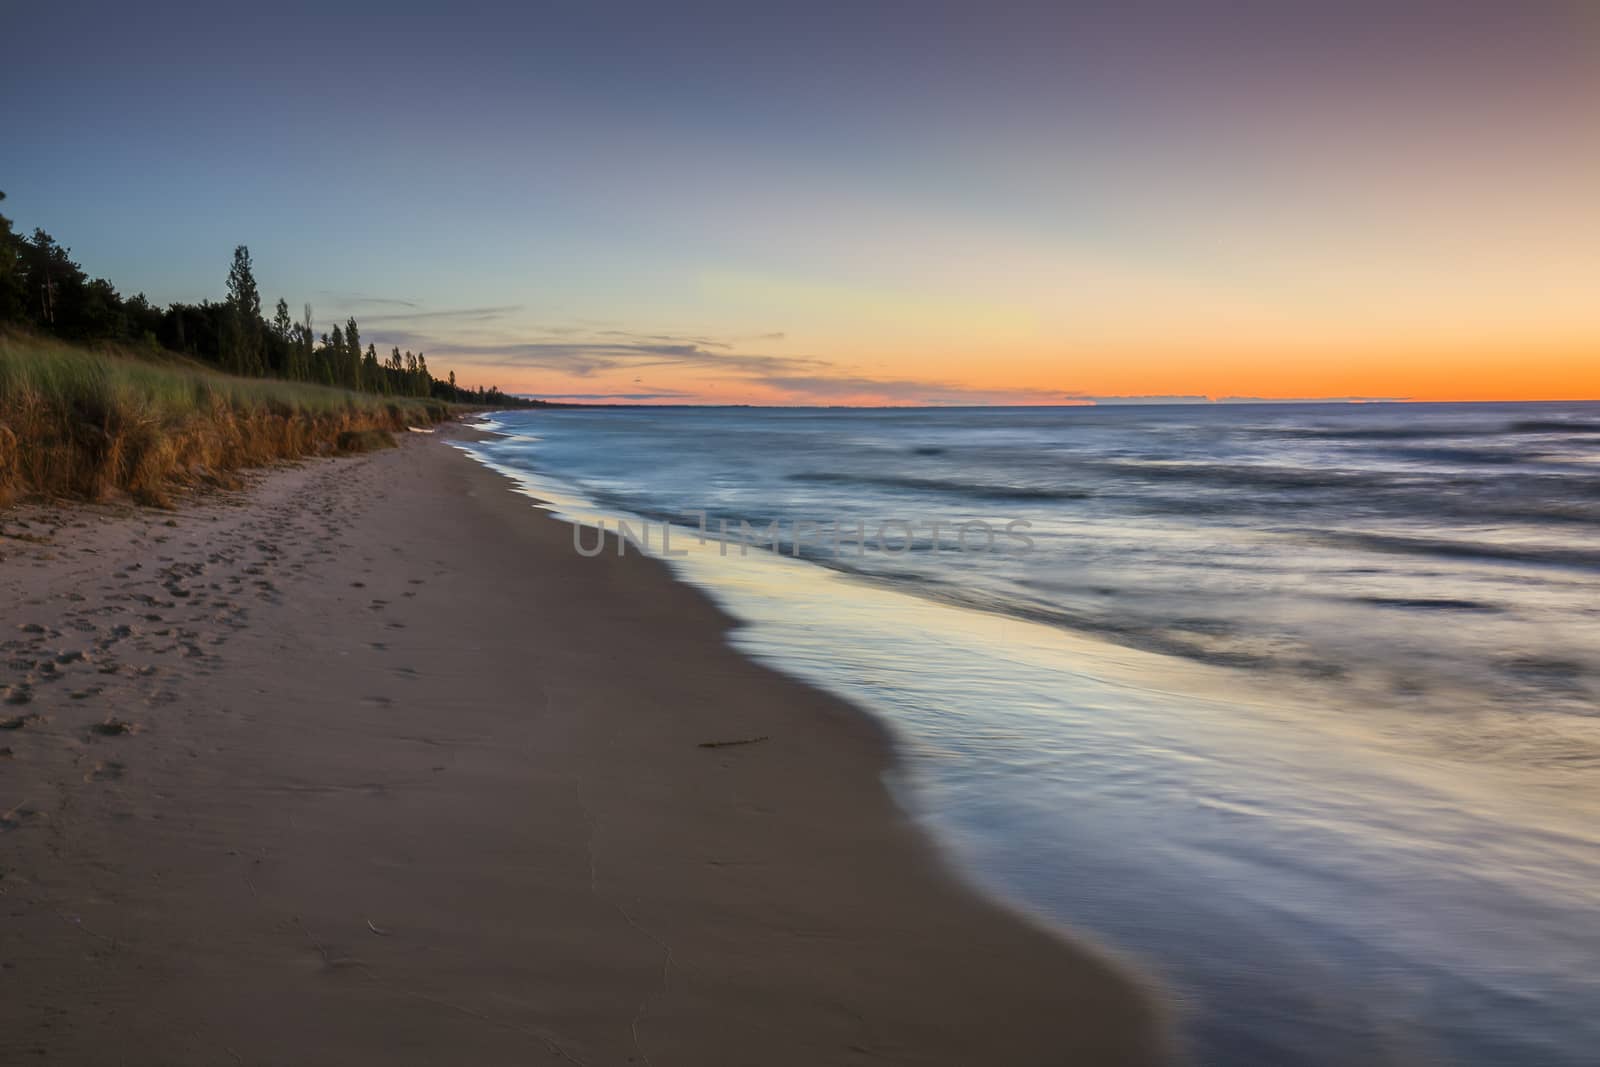 Lake Huron Beach after Sunset - Pinery Provincial Park by gonepaddling